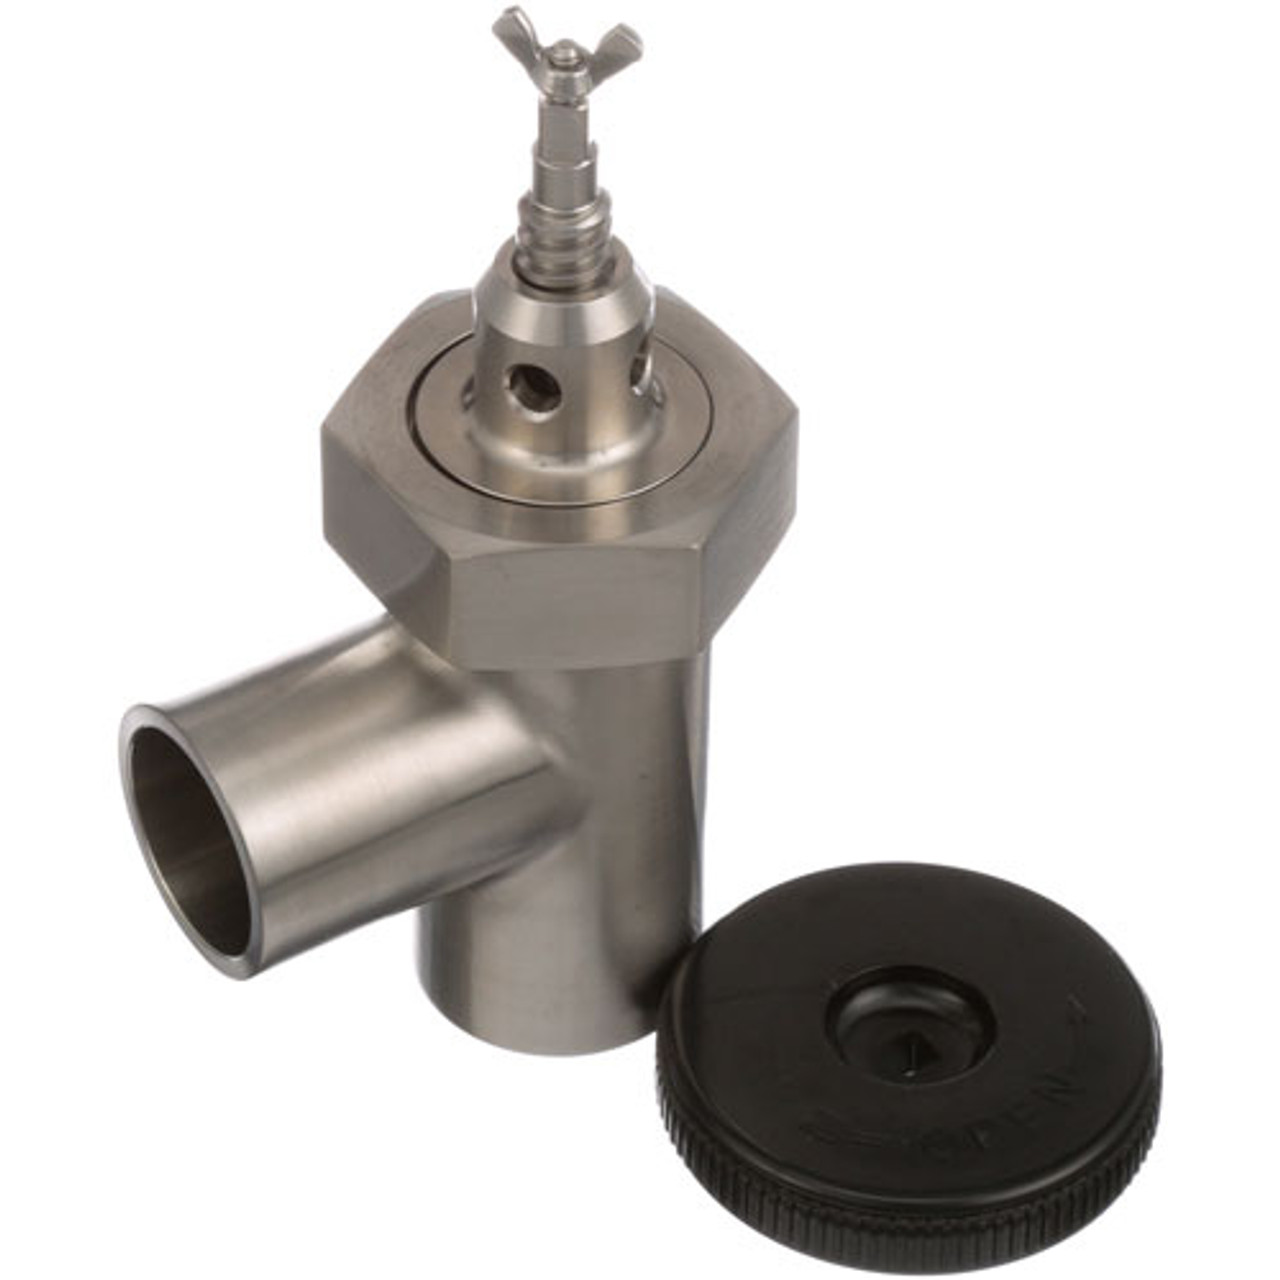 Kettle Faucet , 1-1/2" Draw Off Valve - Replacement Part For Cleveland KE50219